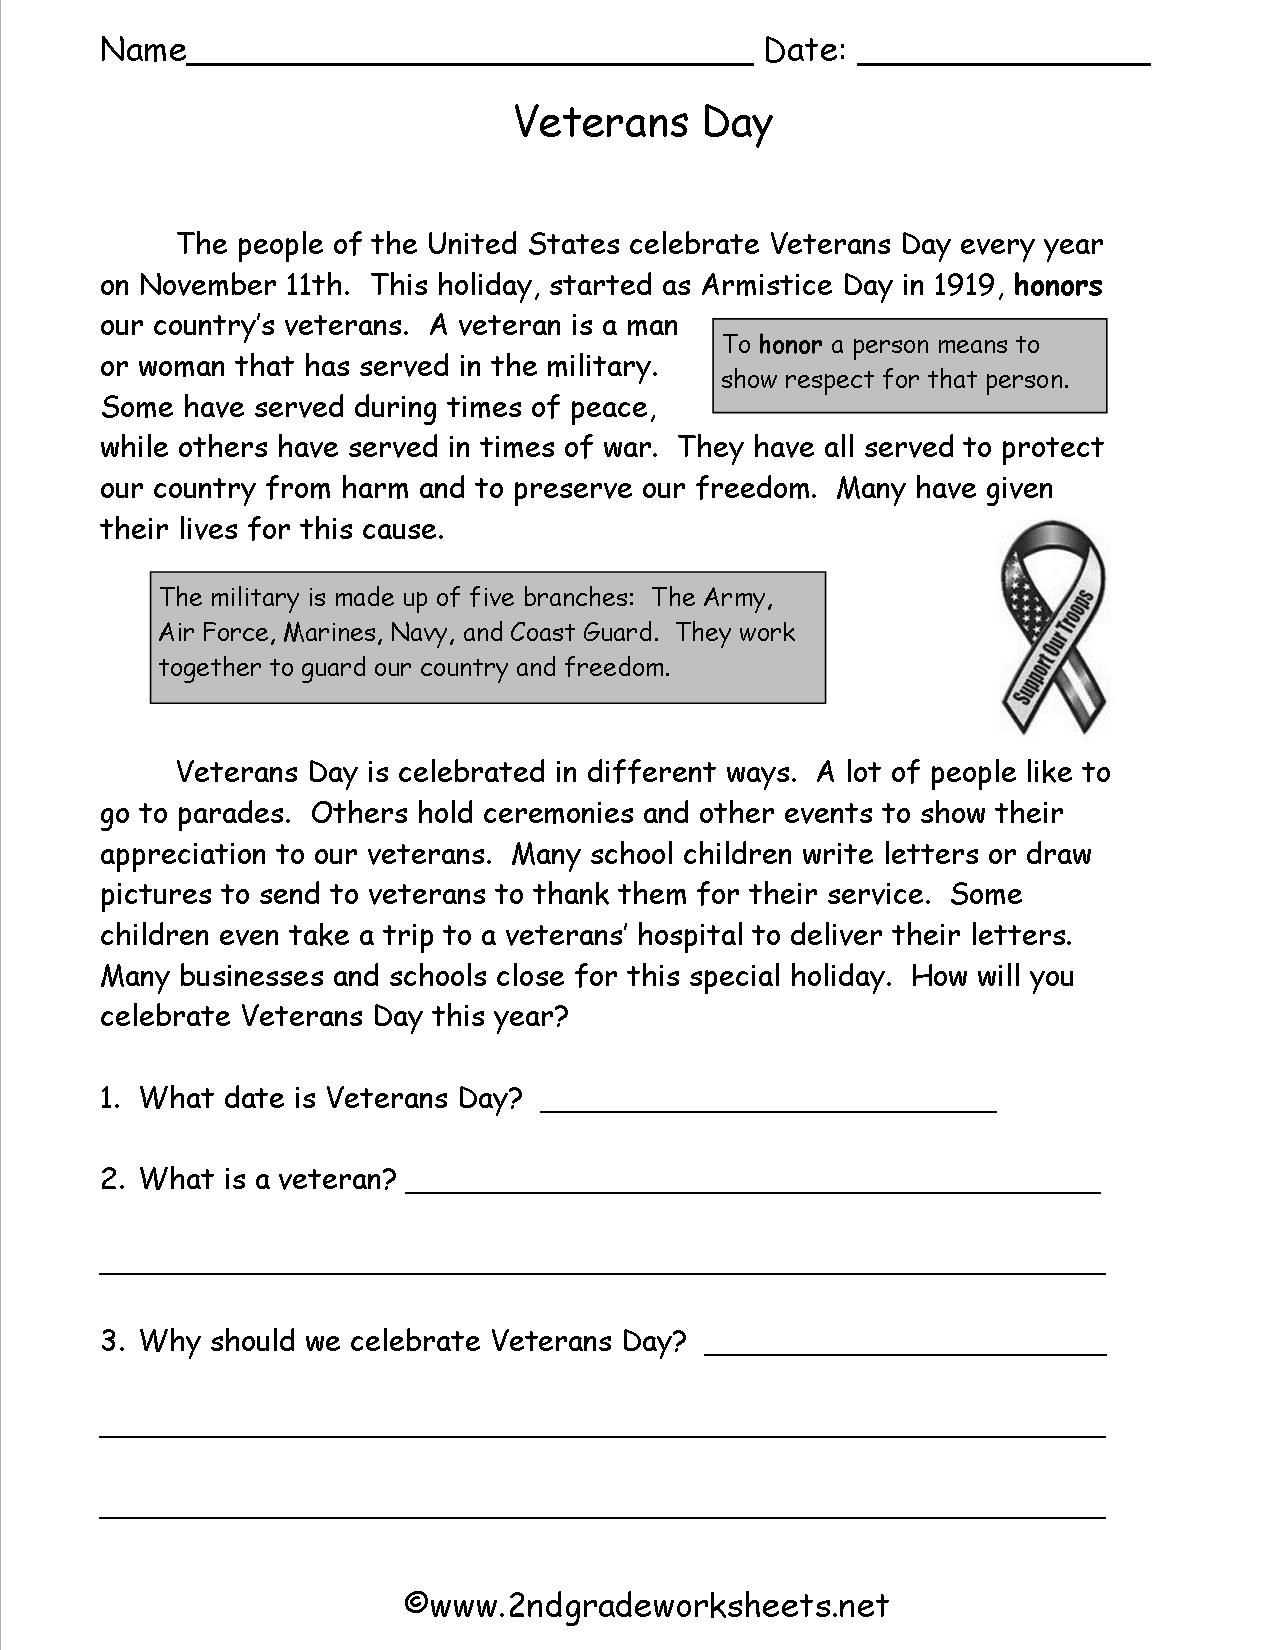 7th Grade Math Worksheets Free Printable with Answers or Veterans Day Worksheets